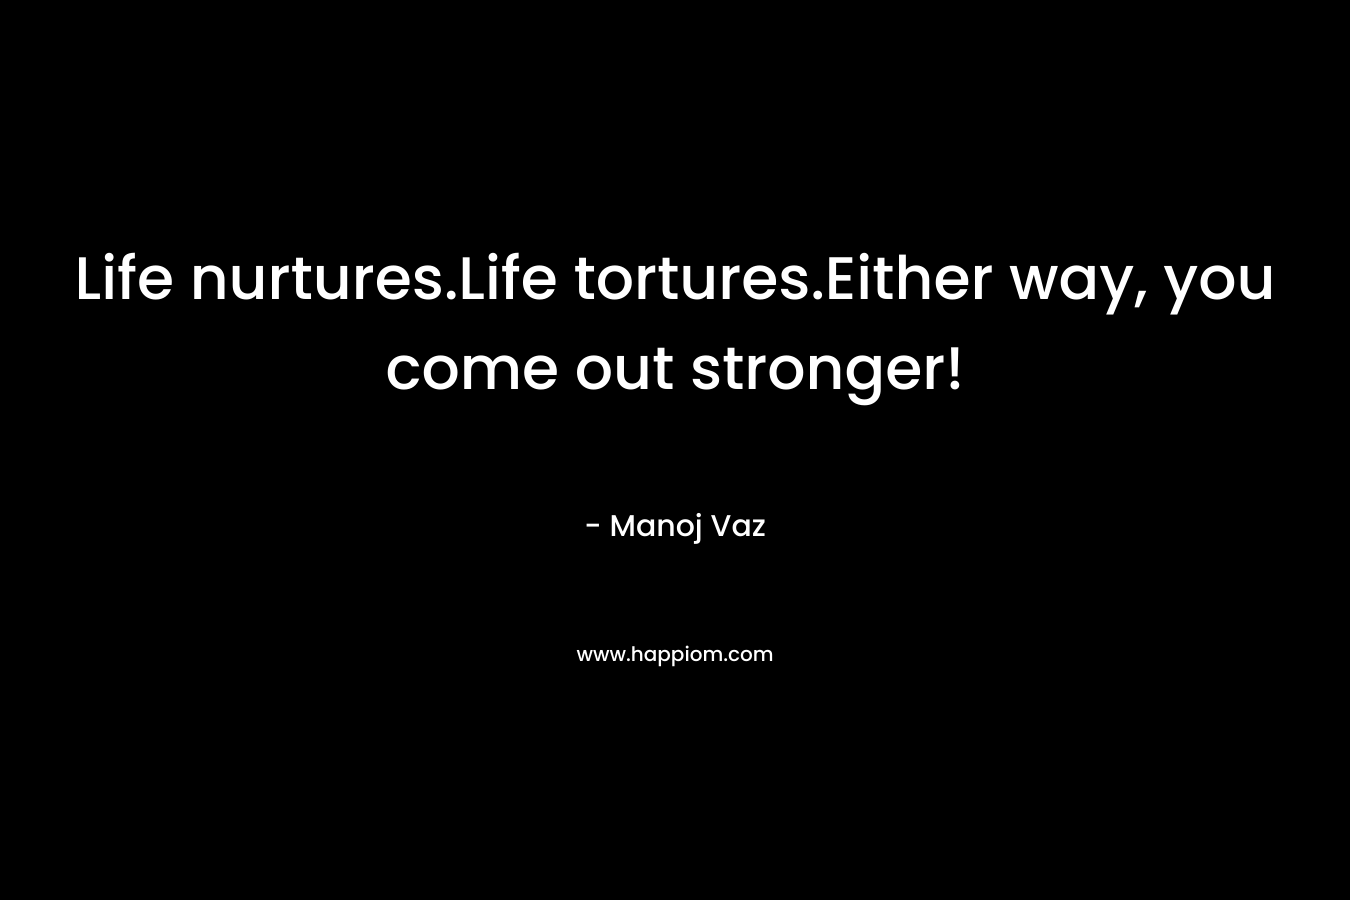 Life nurtures.Life tortures.Either way, you come out stronger!